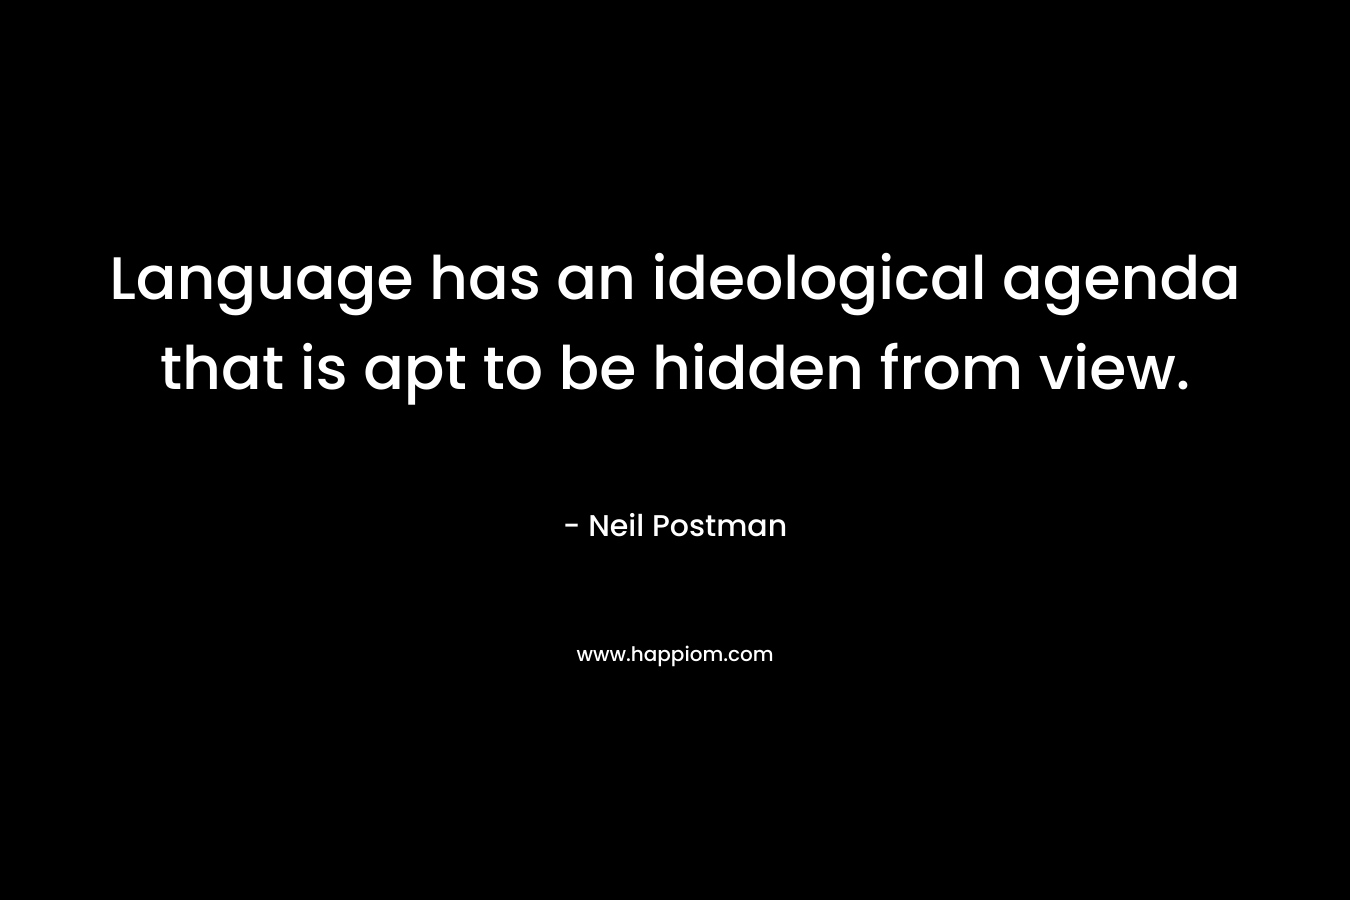 Language has an ideological agenda that is apt to be hidden from view.